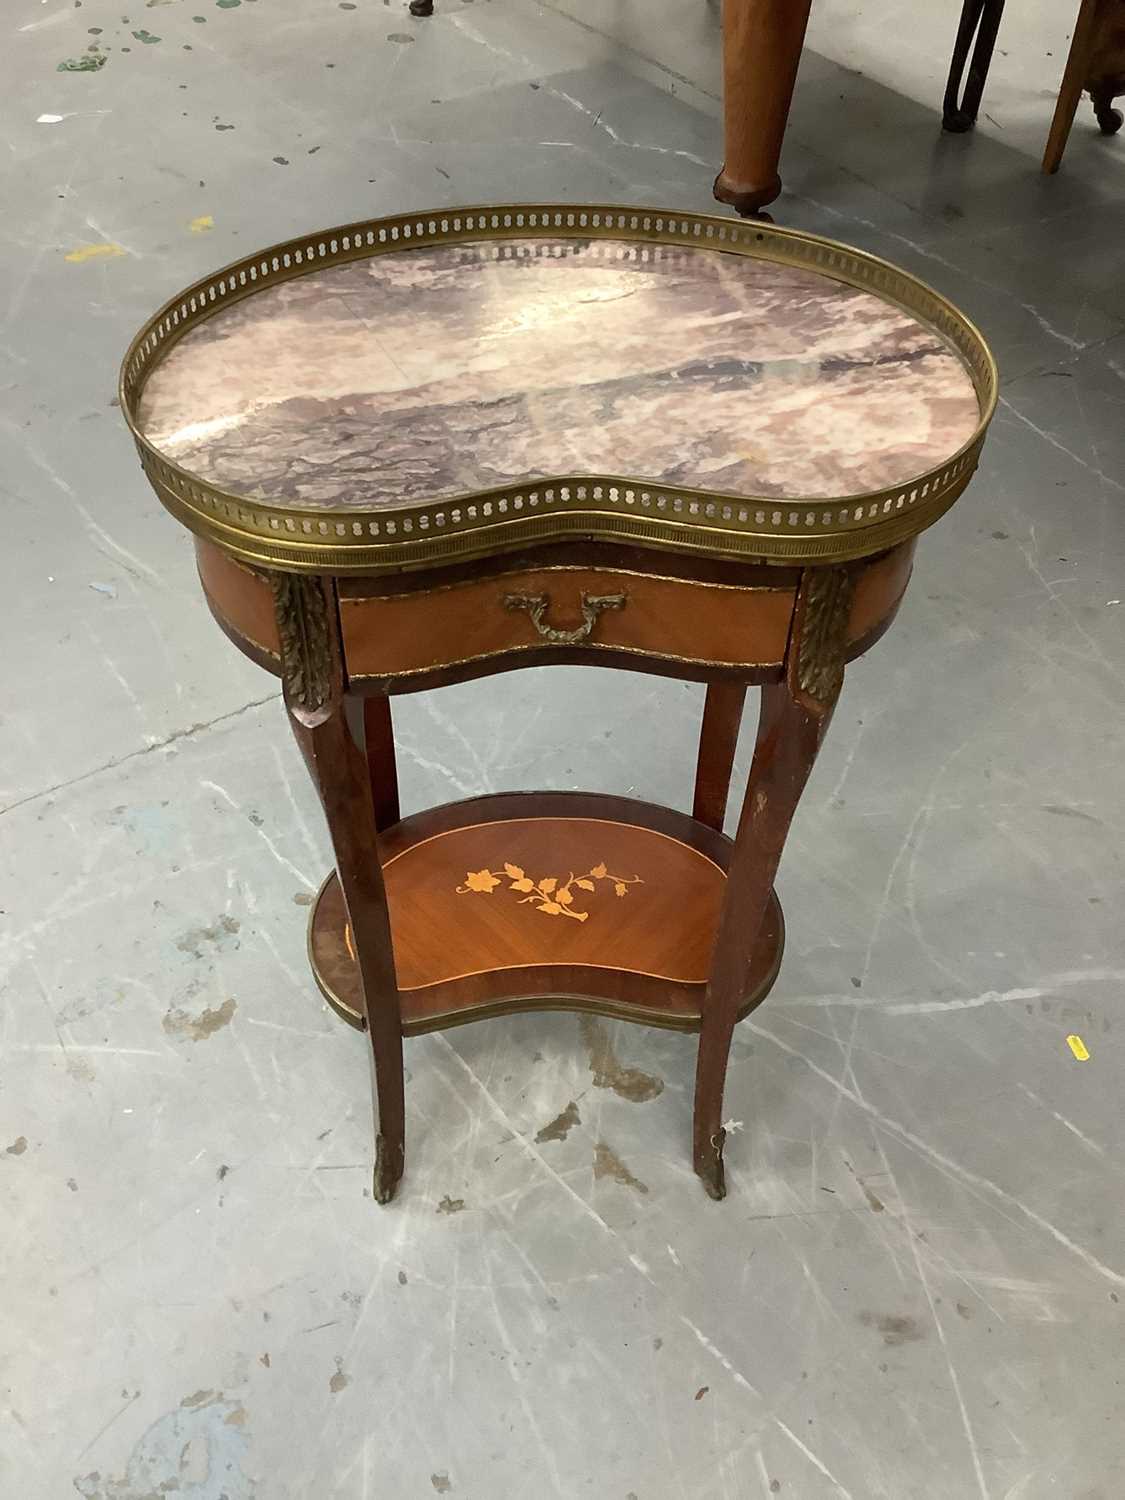 Lot 853 - French kidney shape two tier table with brass galleried marble top, drawer and floral marquetry inlaid undertier